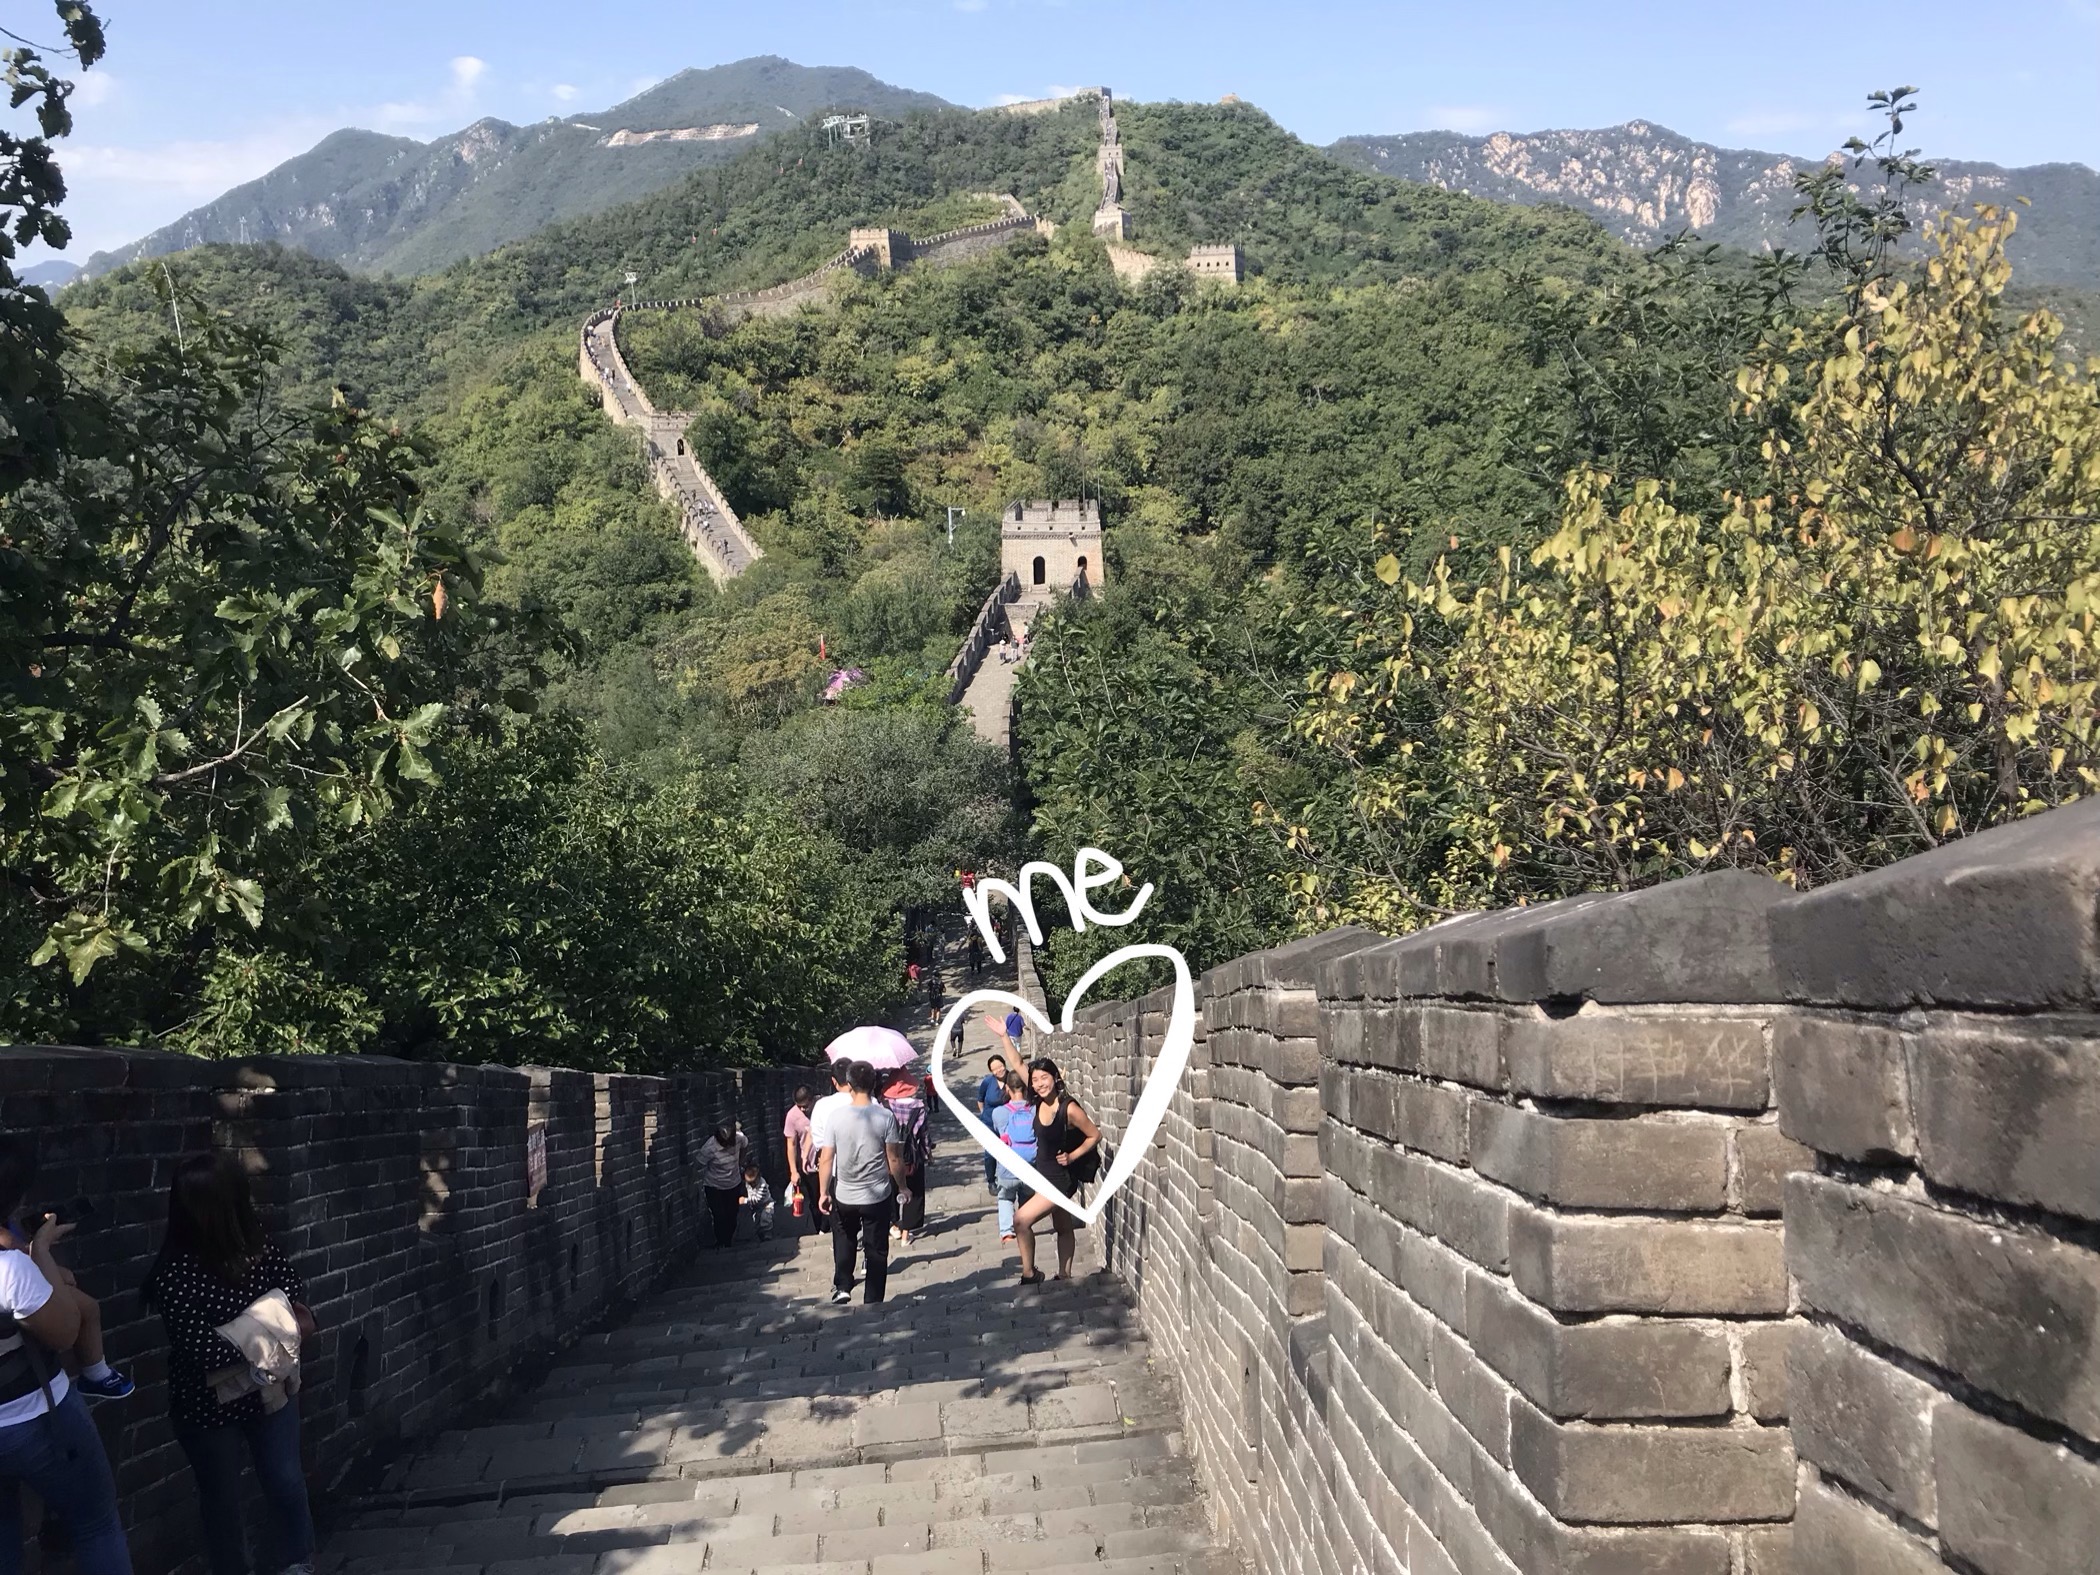 Students walking on the Great Wall of China